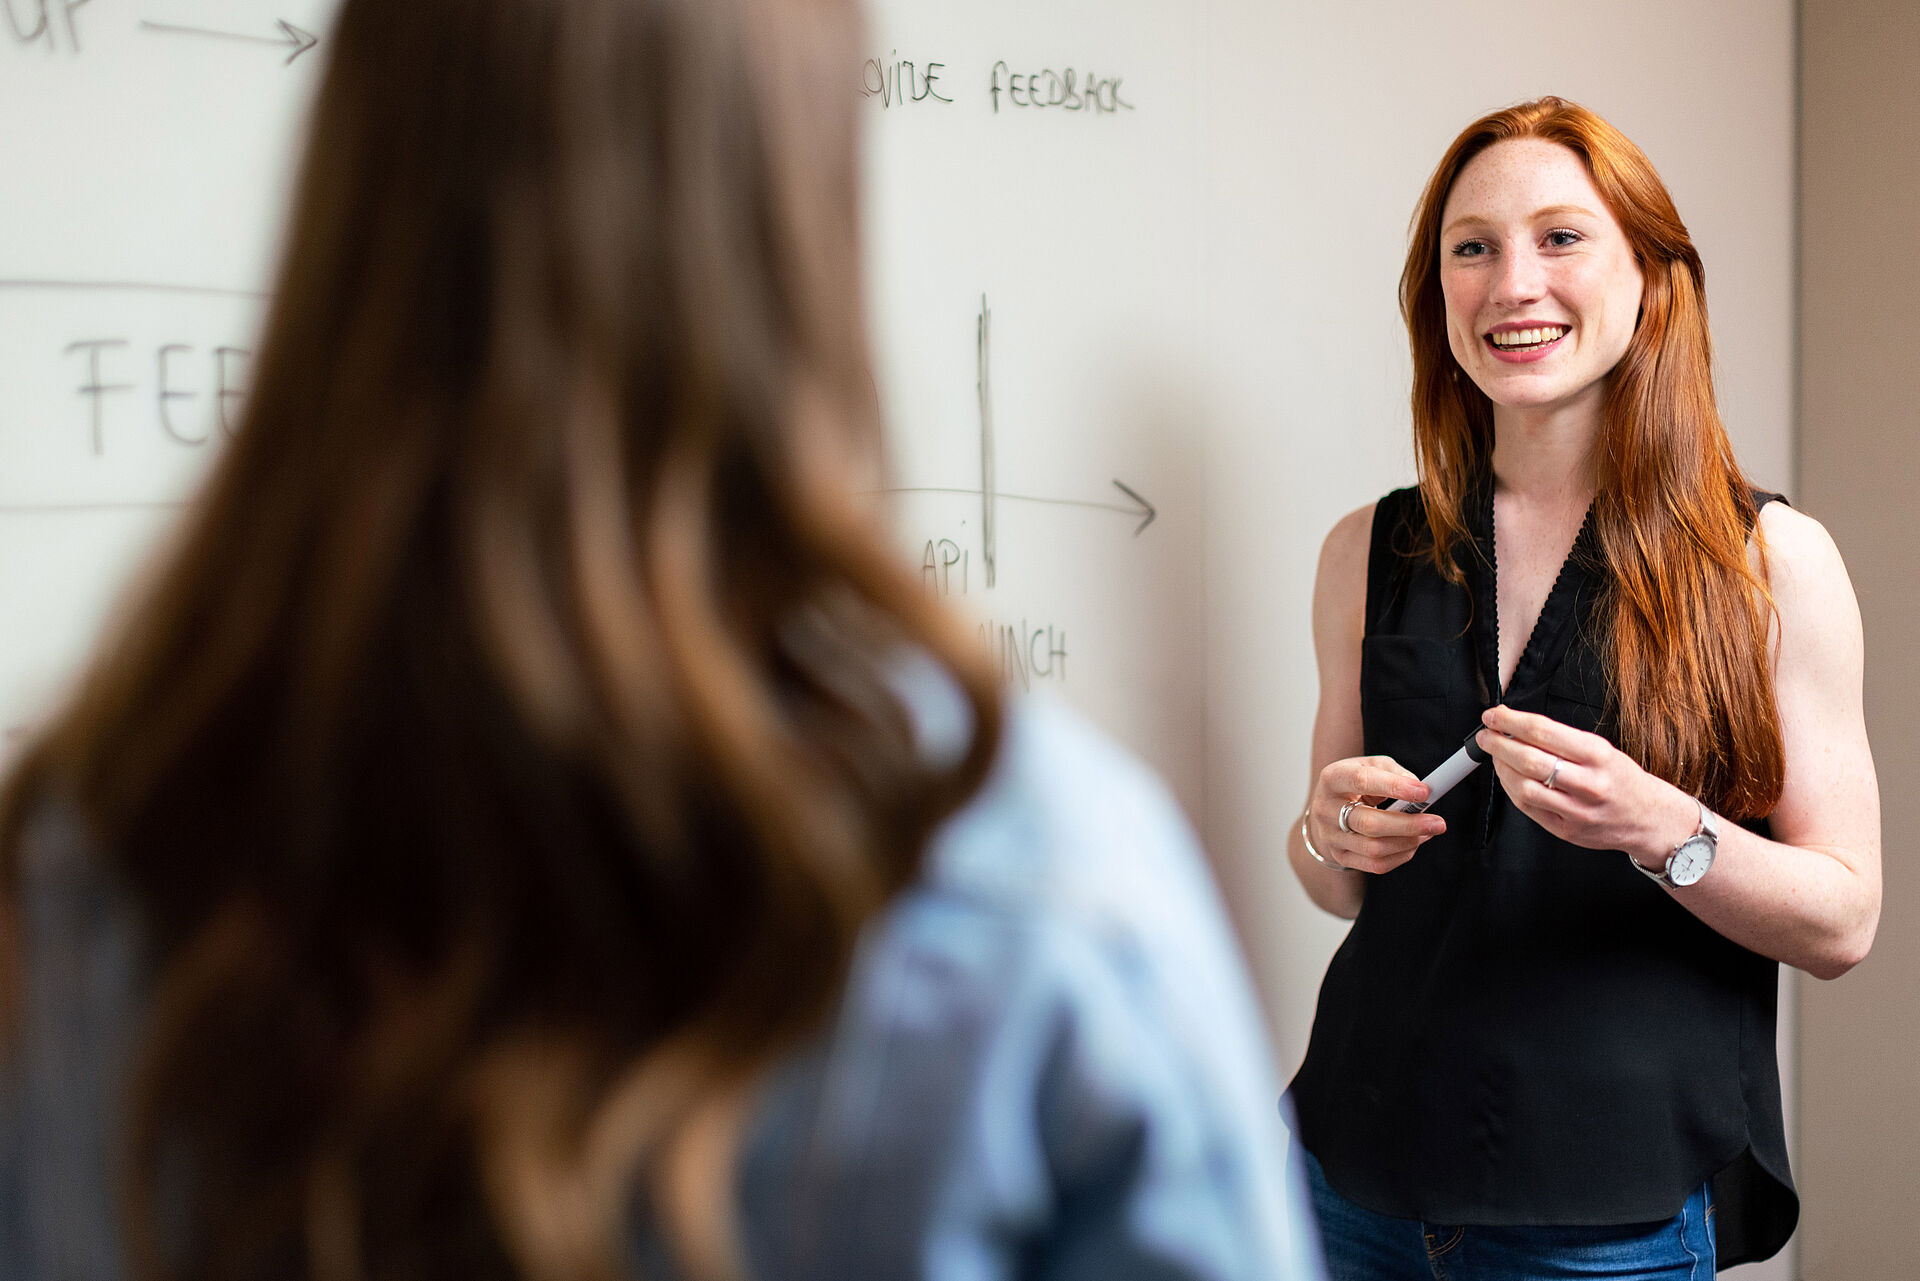 A young woman stands in front of a whiteboard and explains a formula to another woman.